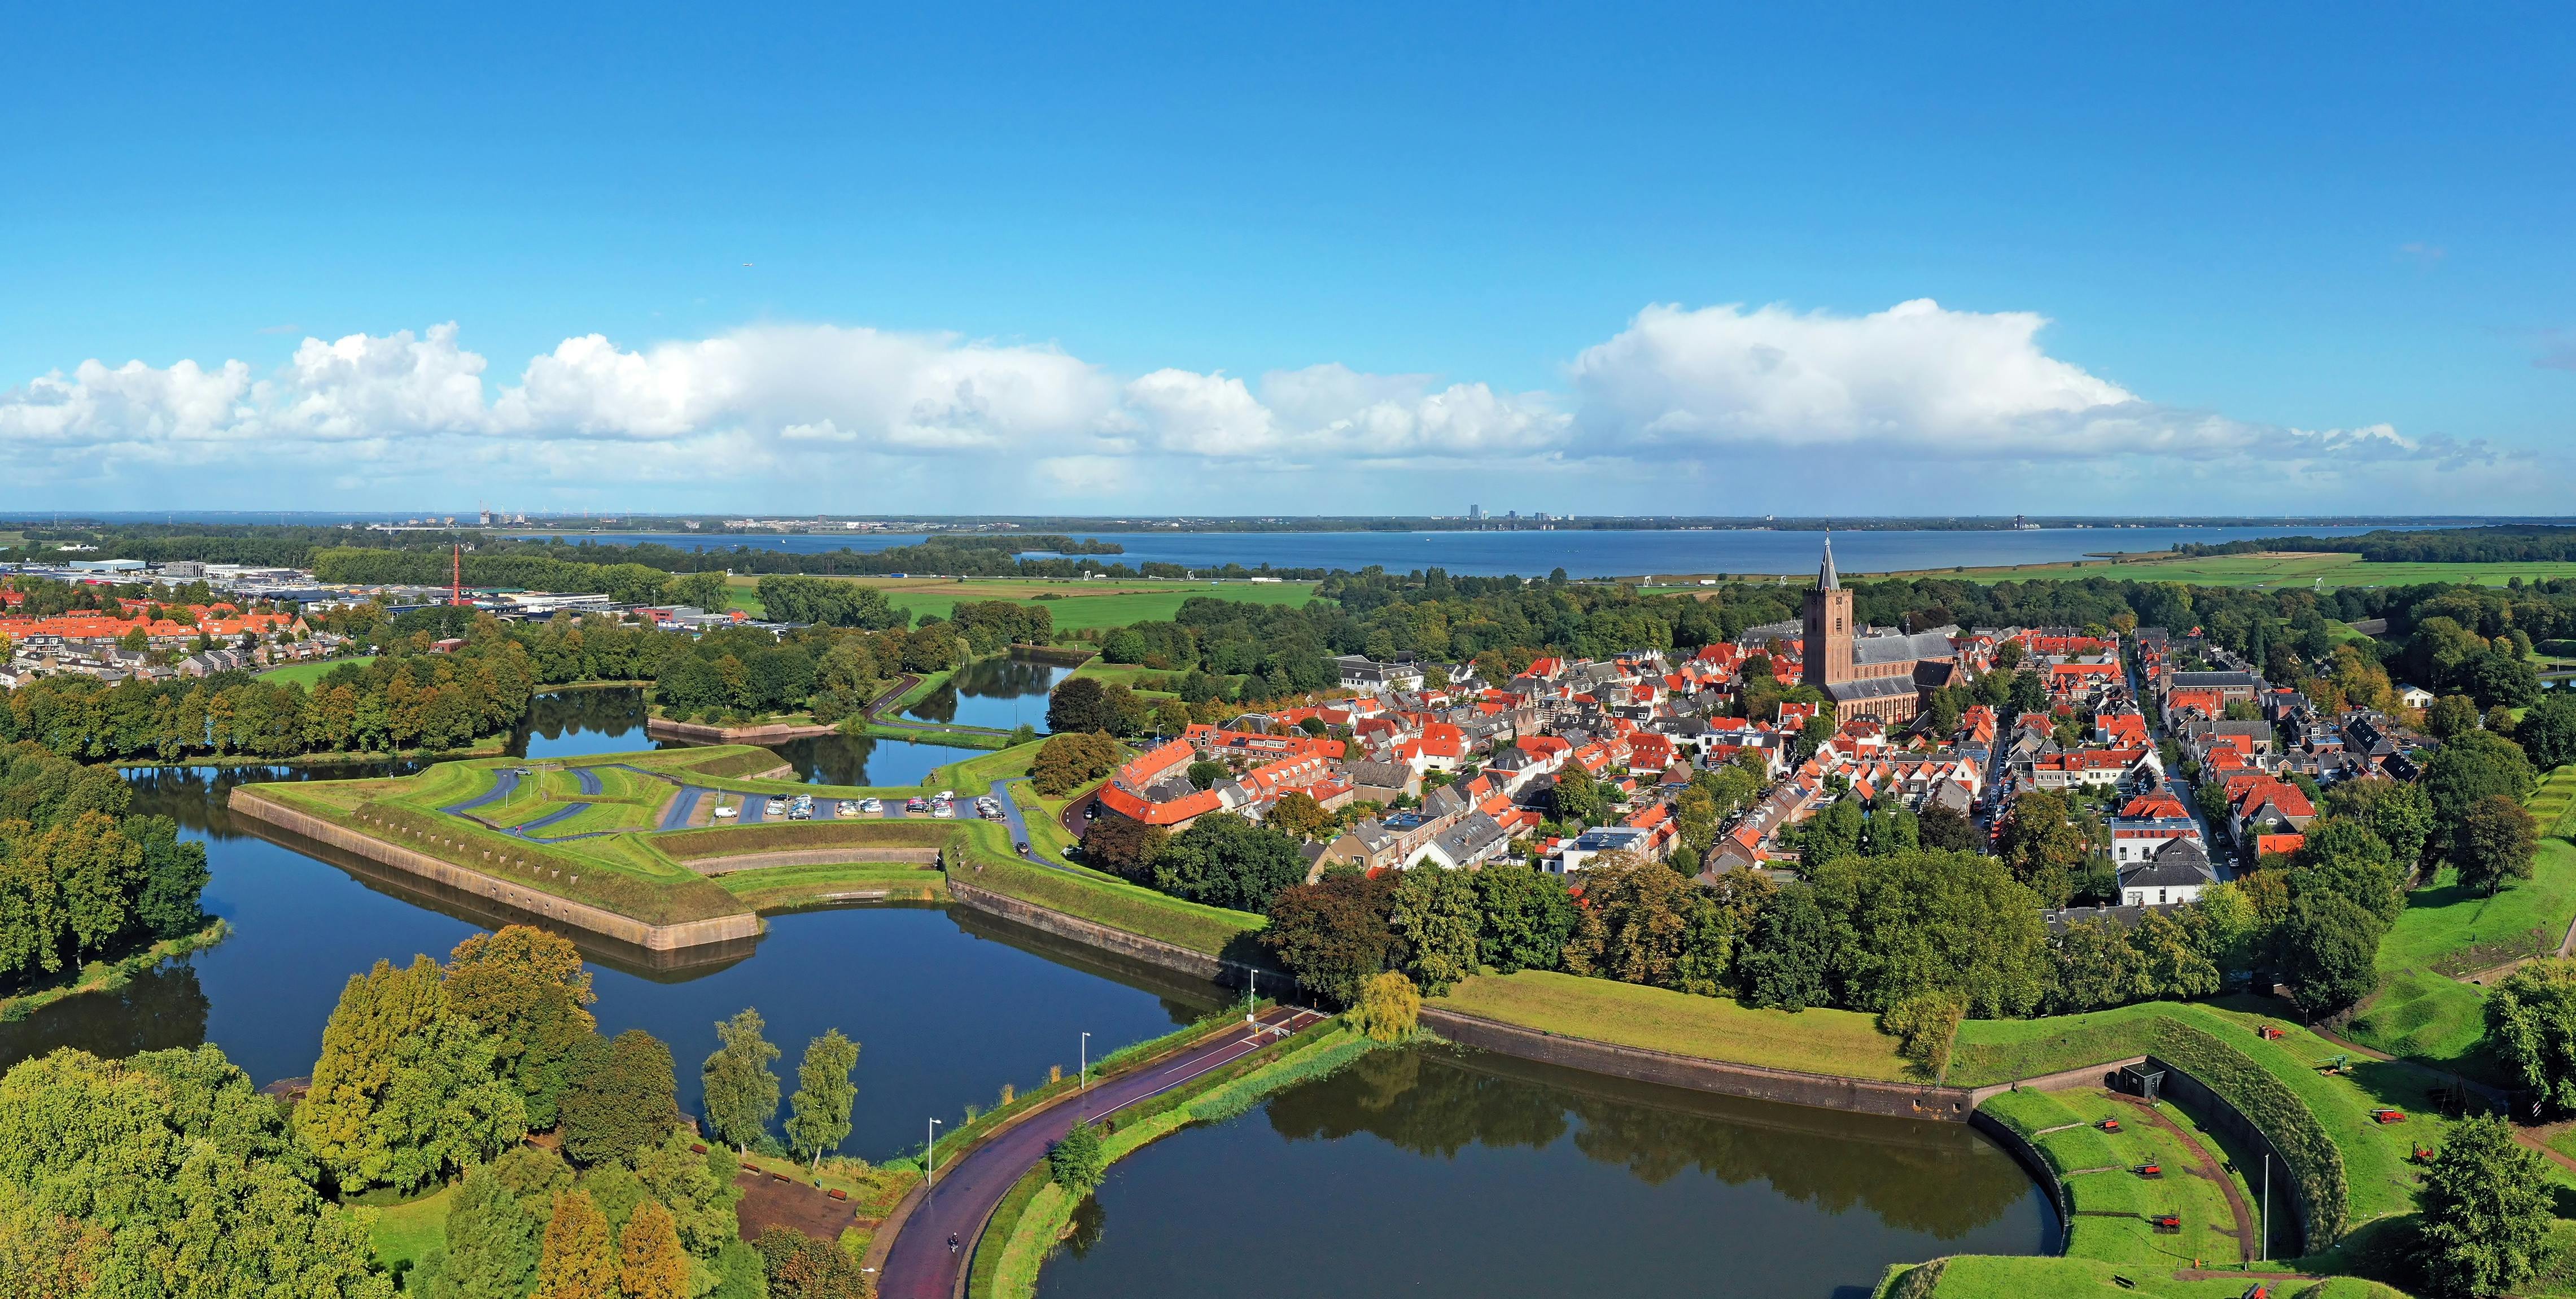 Escape Tour self guided interactive city challenge in Naarden Musement